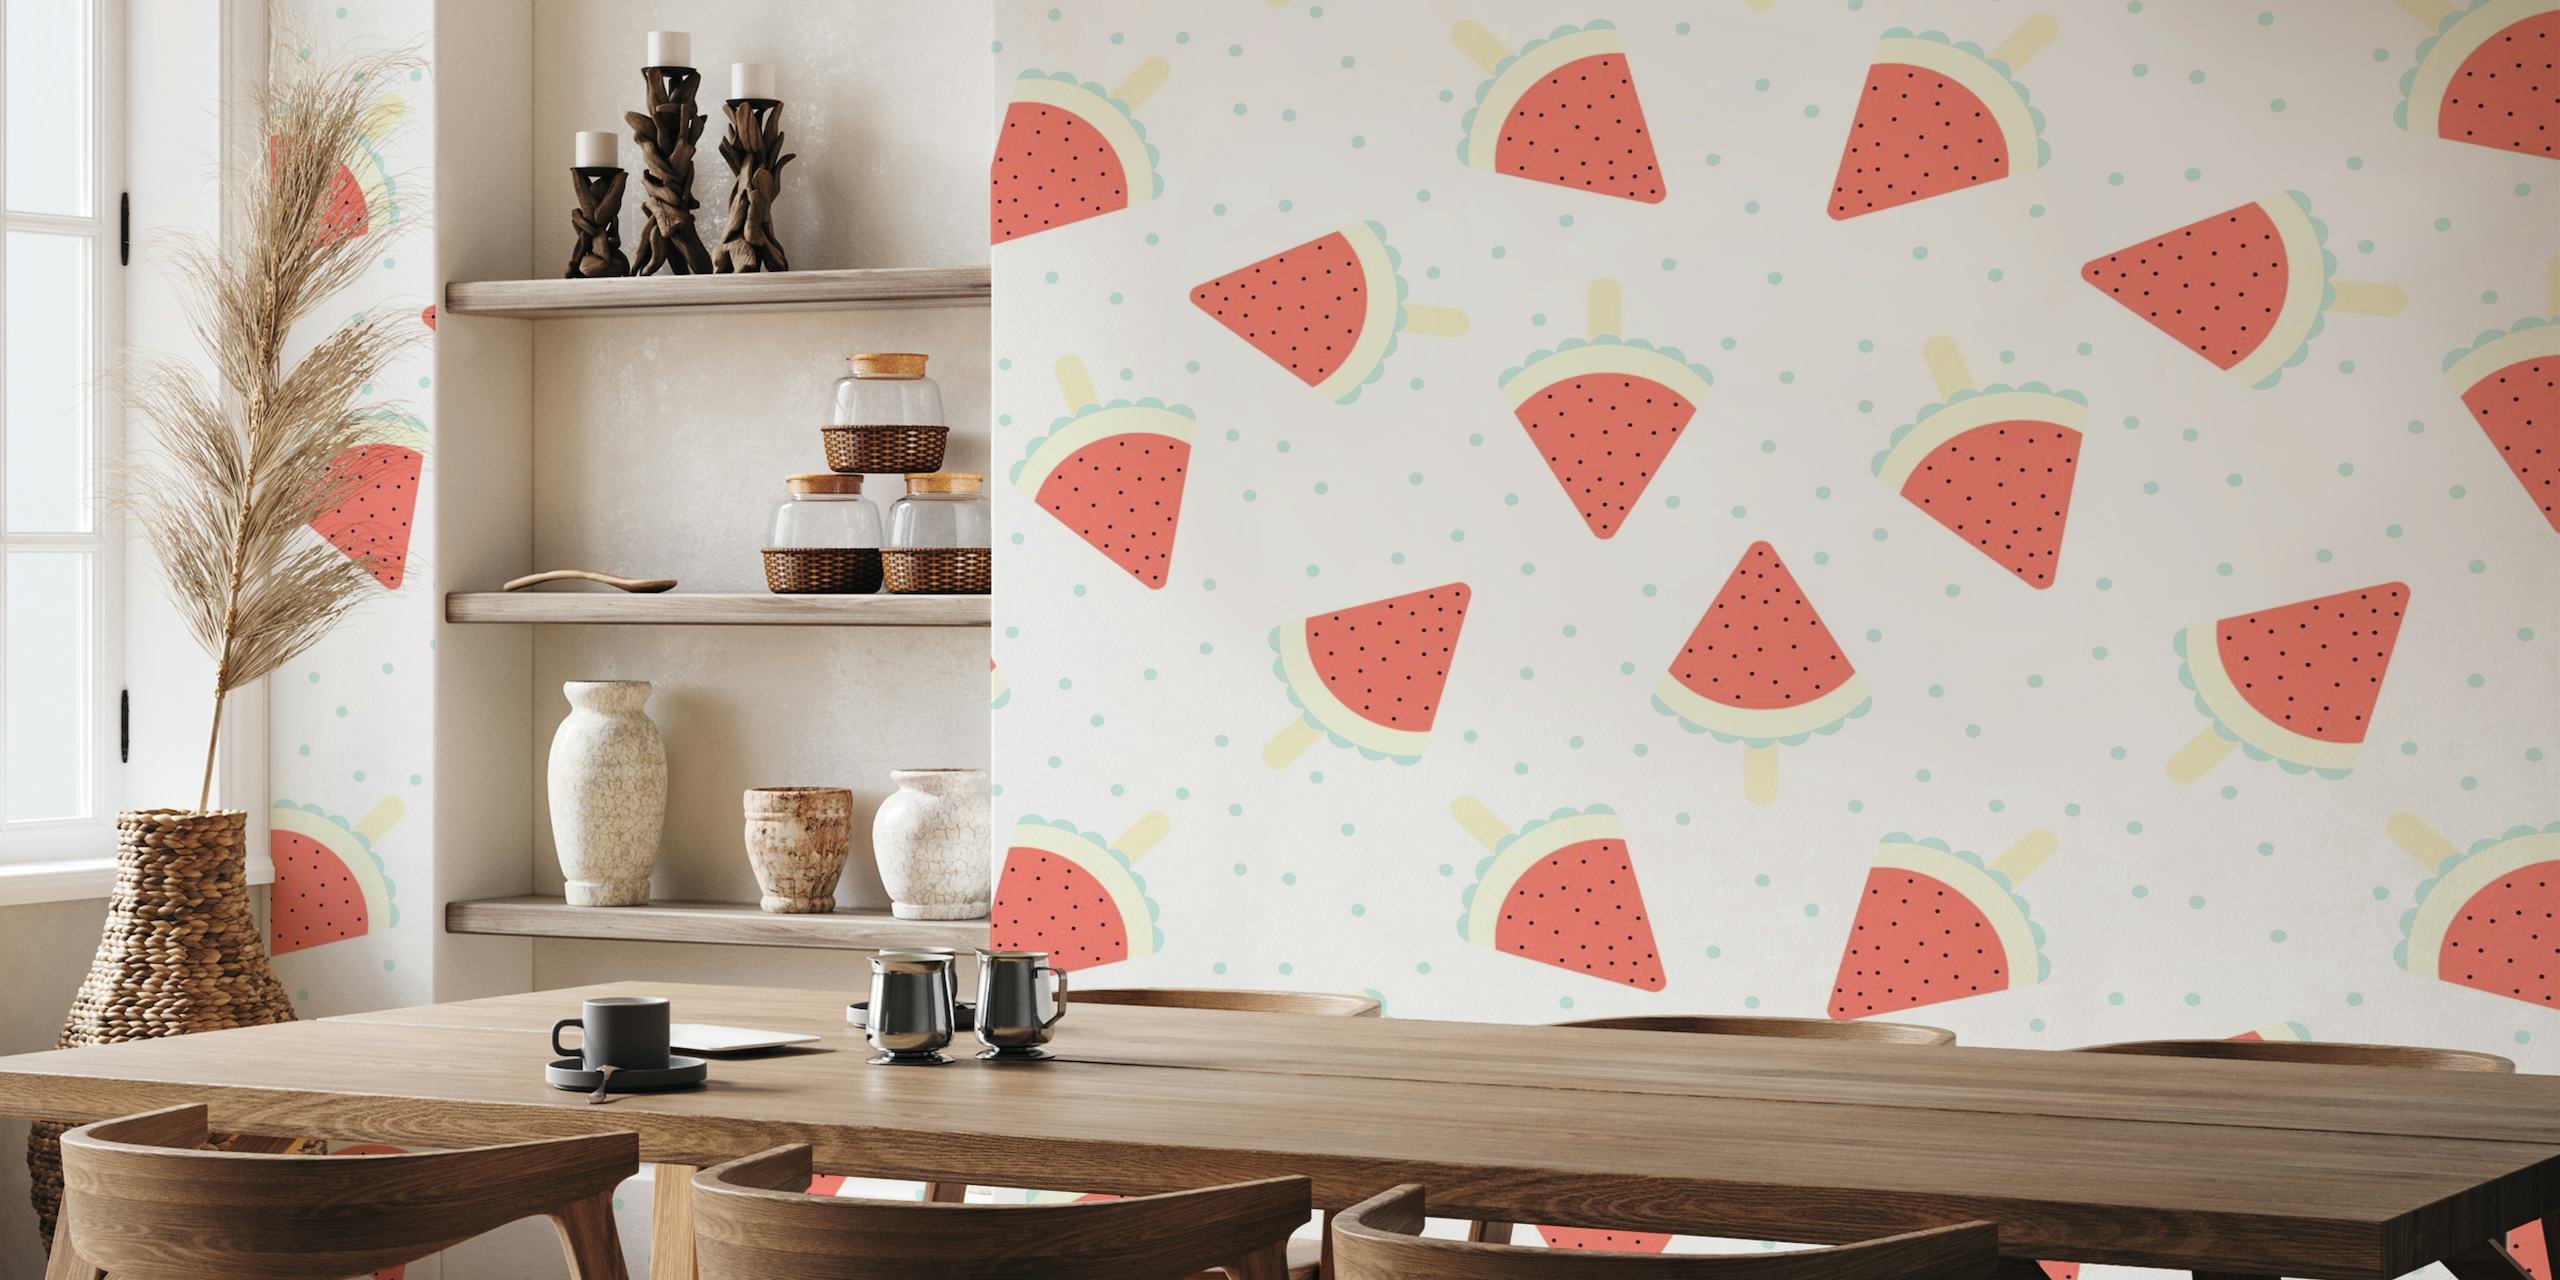 Watermelon popsicles and polka dots pattern wall mural on a light blue background